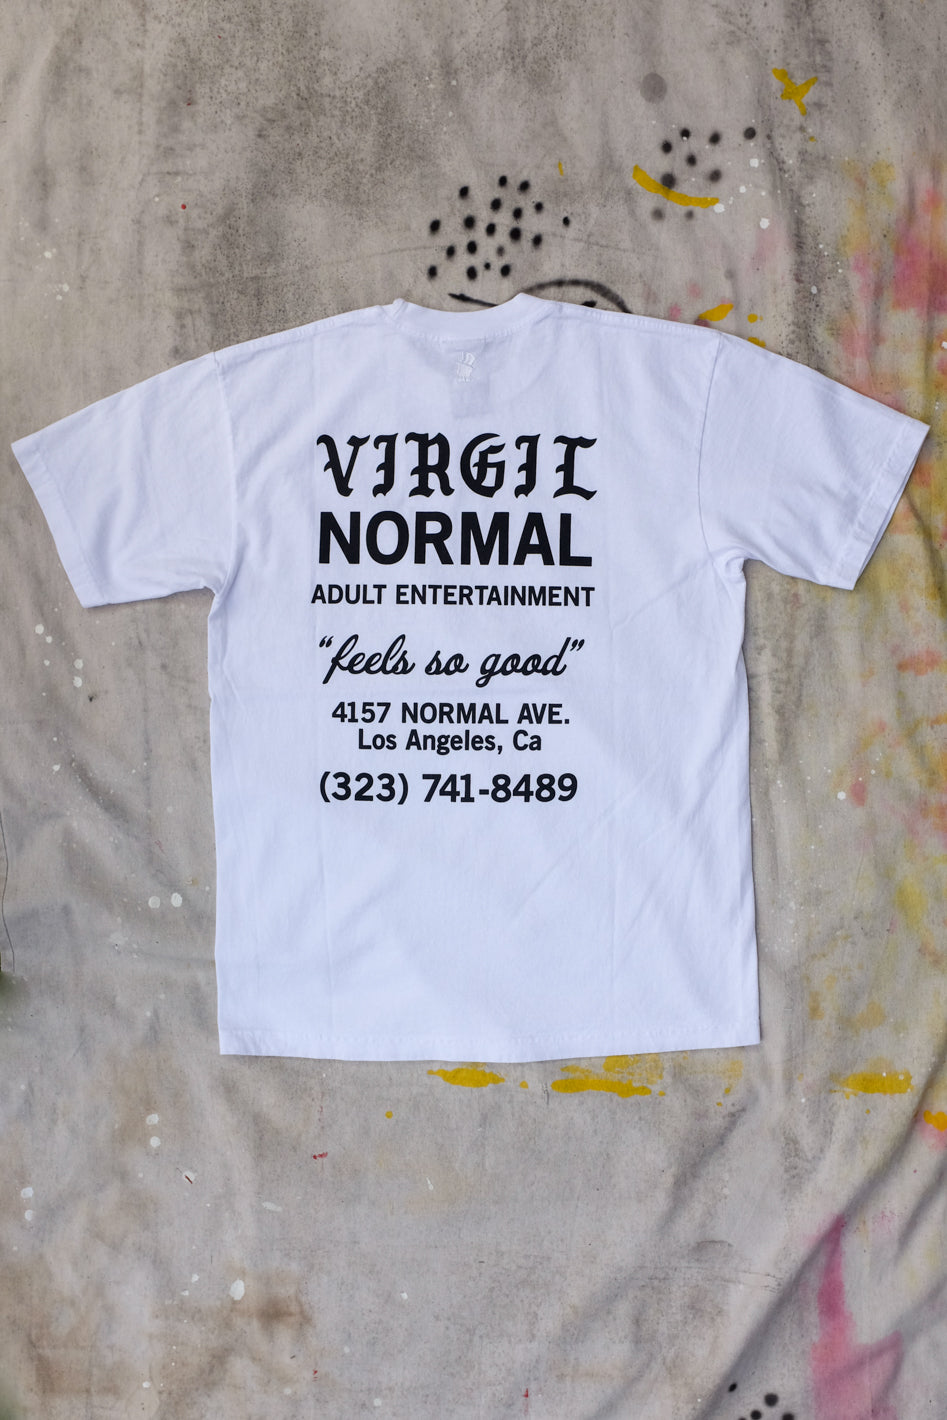 T-shirts  Clothing and Home Goods in Los Angeles - Virgil Normal